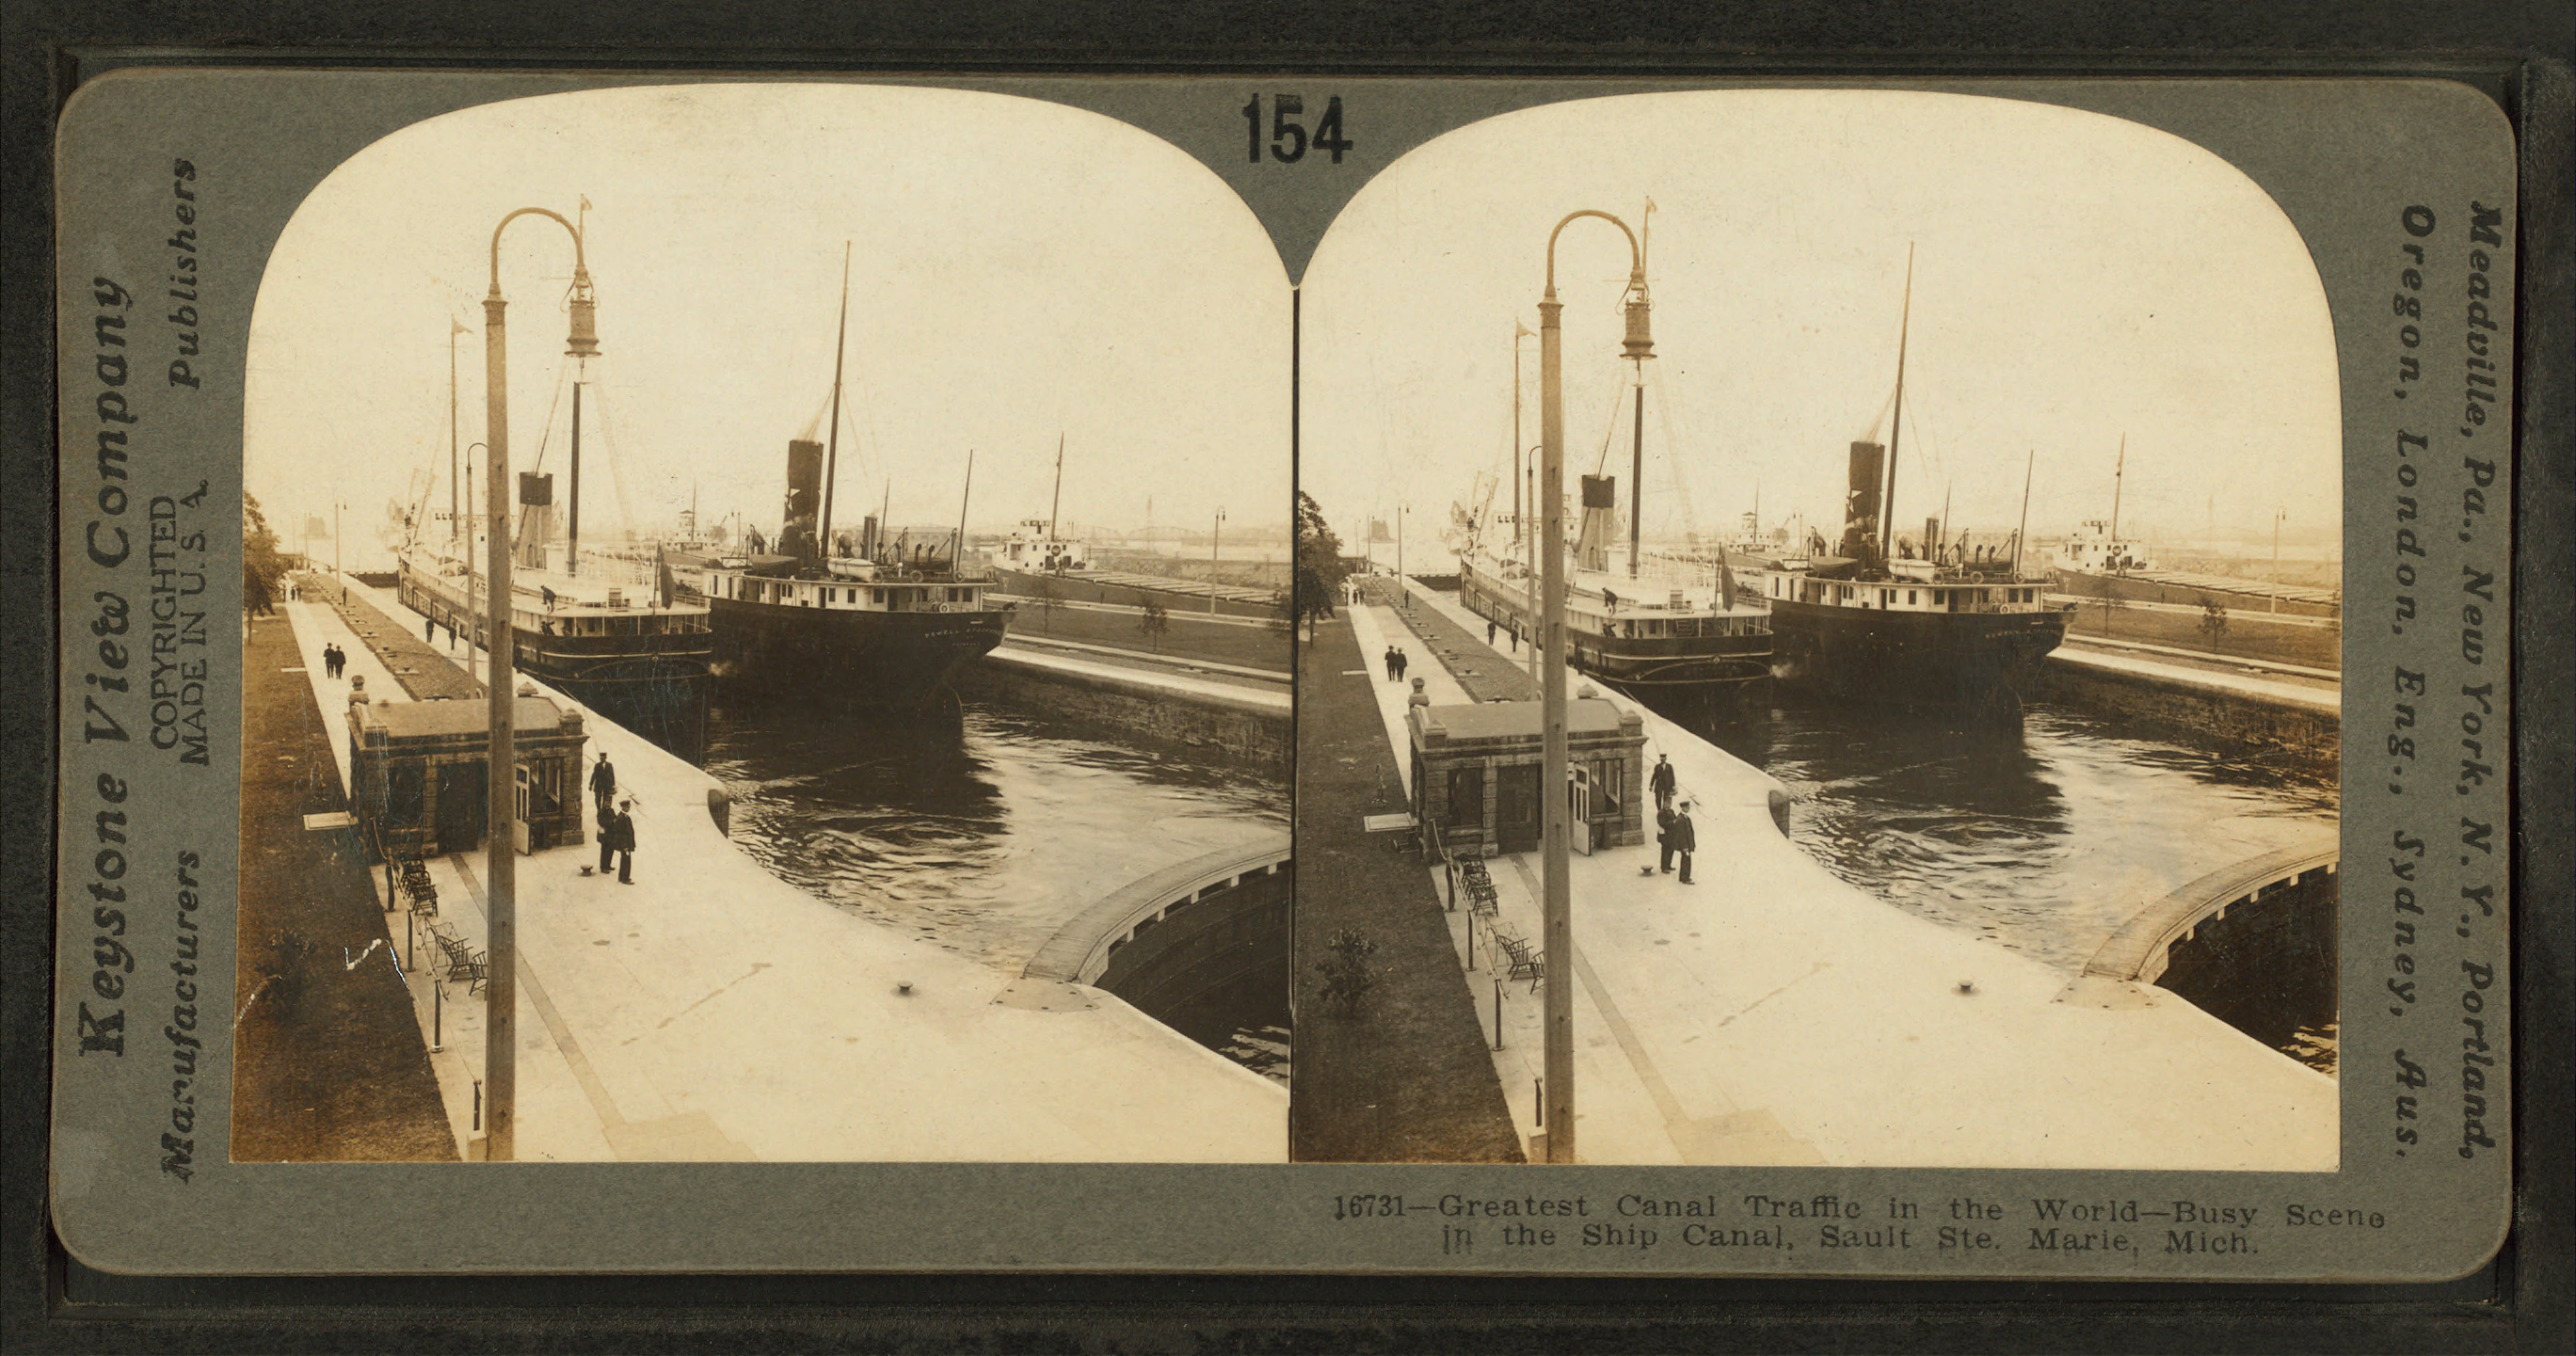 Greatest canal traffic in the world, Sault Ste. Marie, Mich, from Robert N. Dennis collection of stereoscopic views